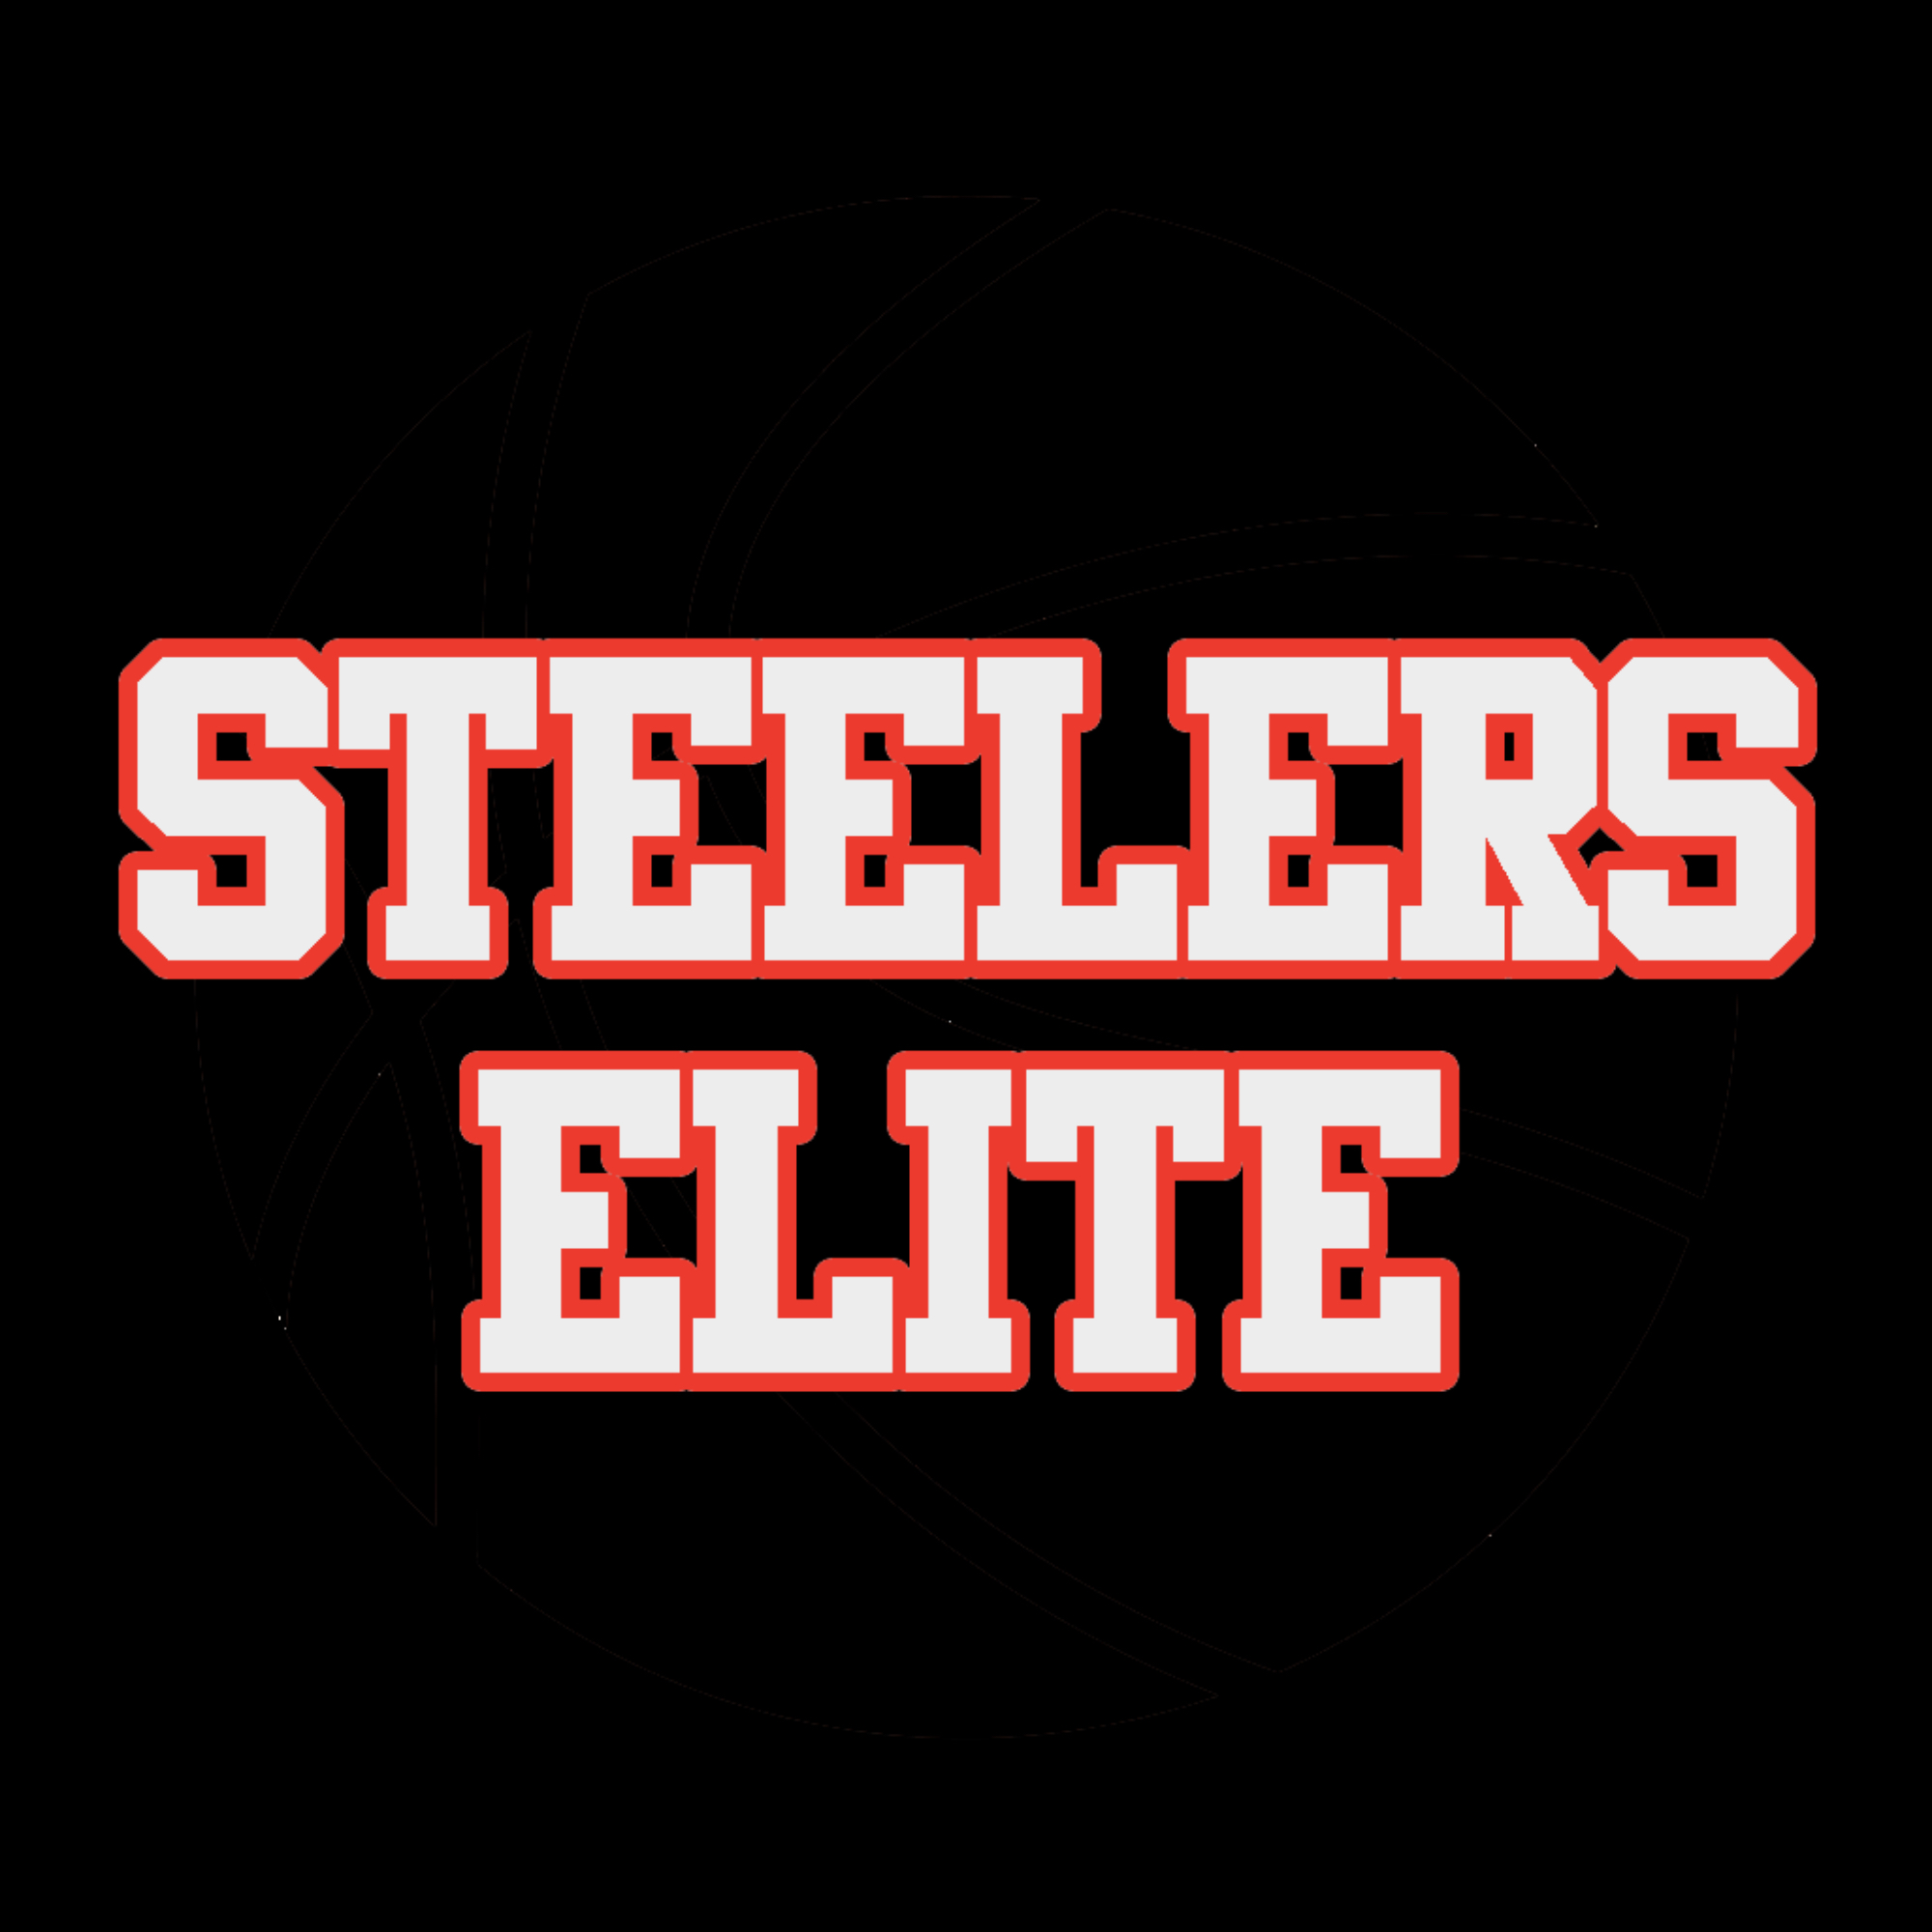 The official logo of Steelers Elite